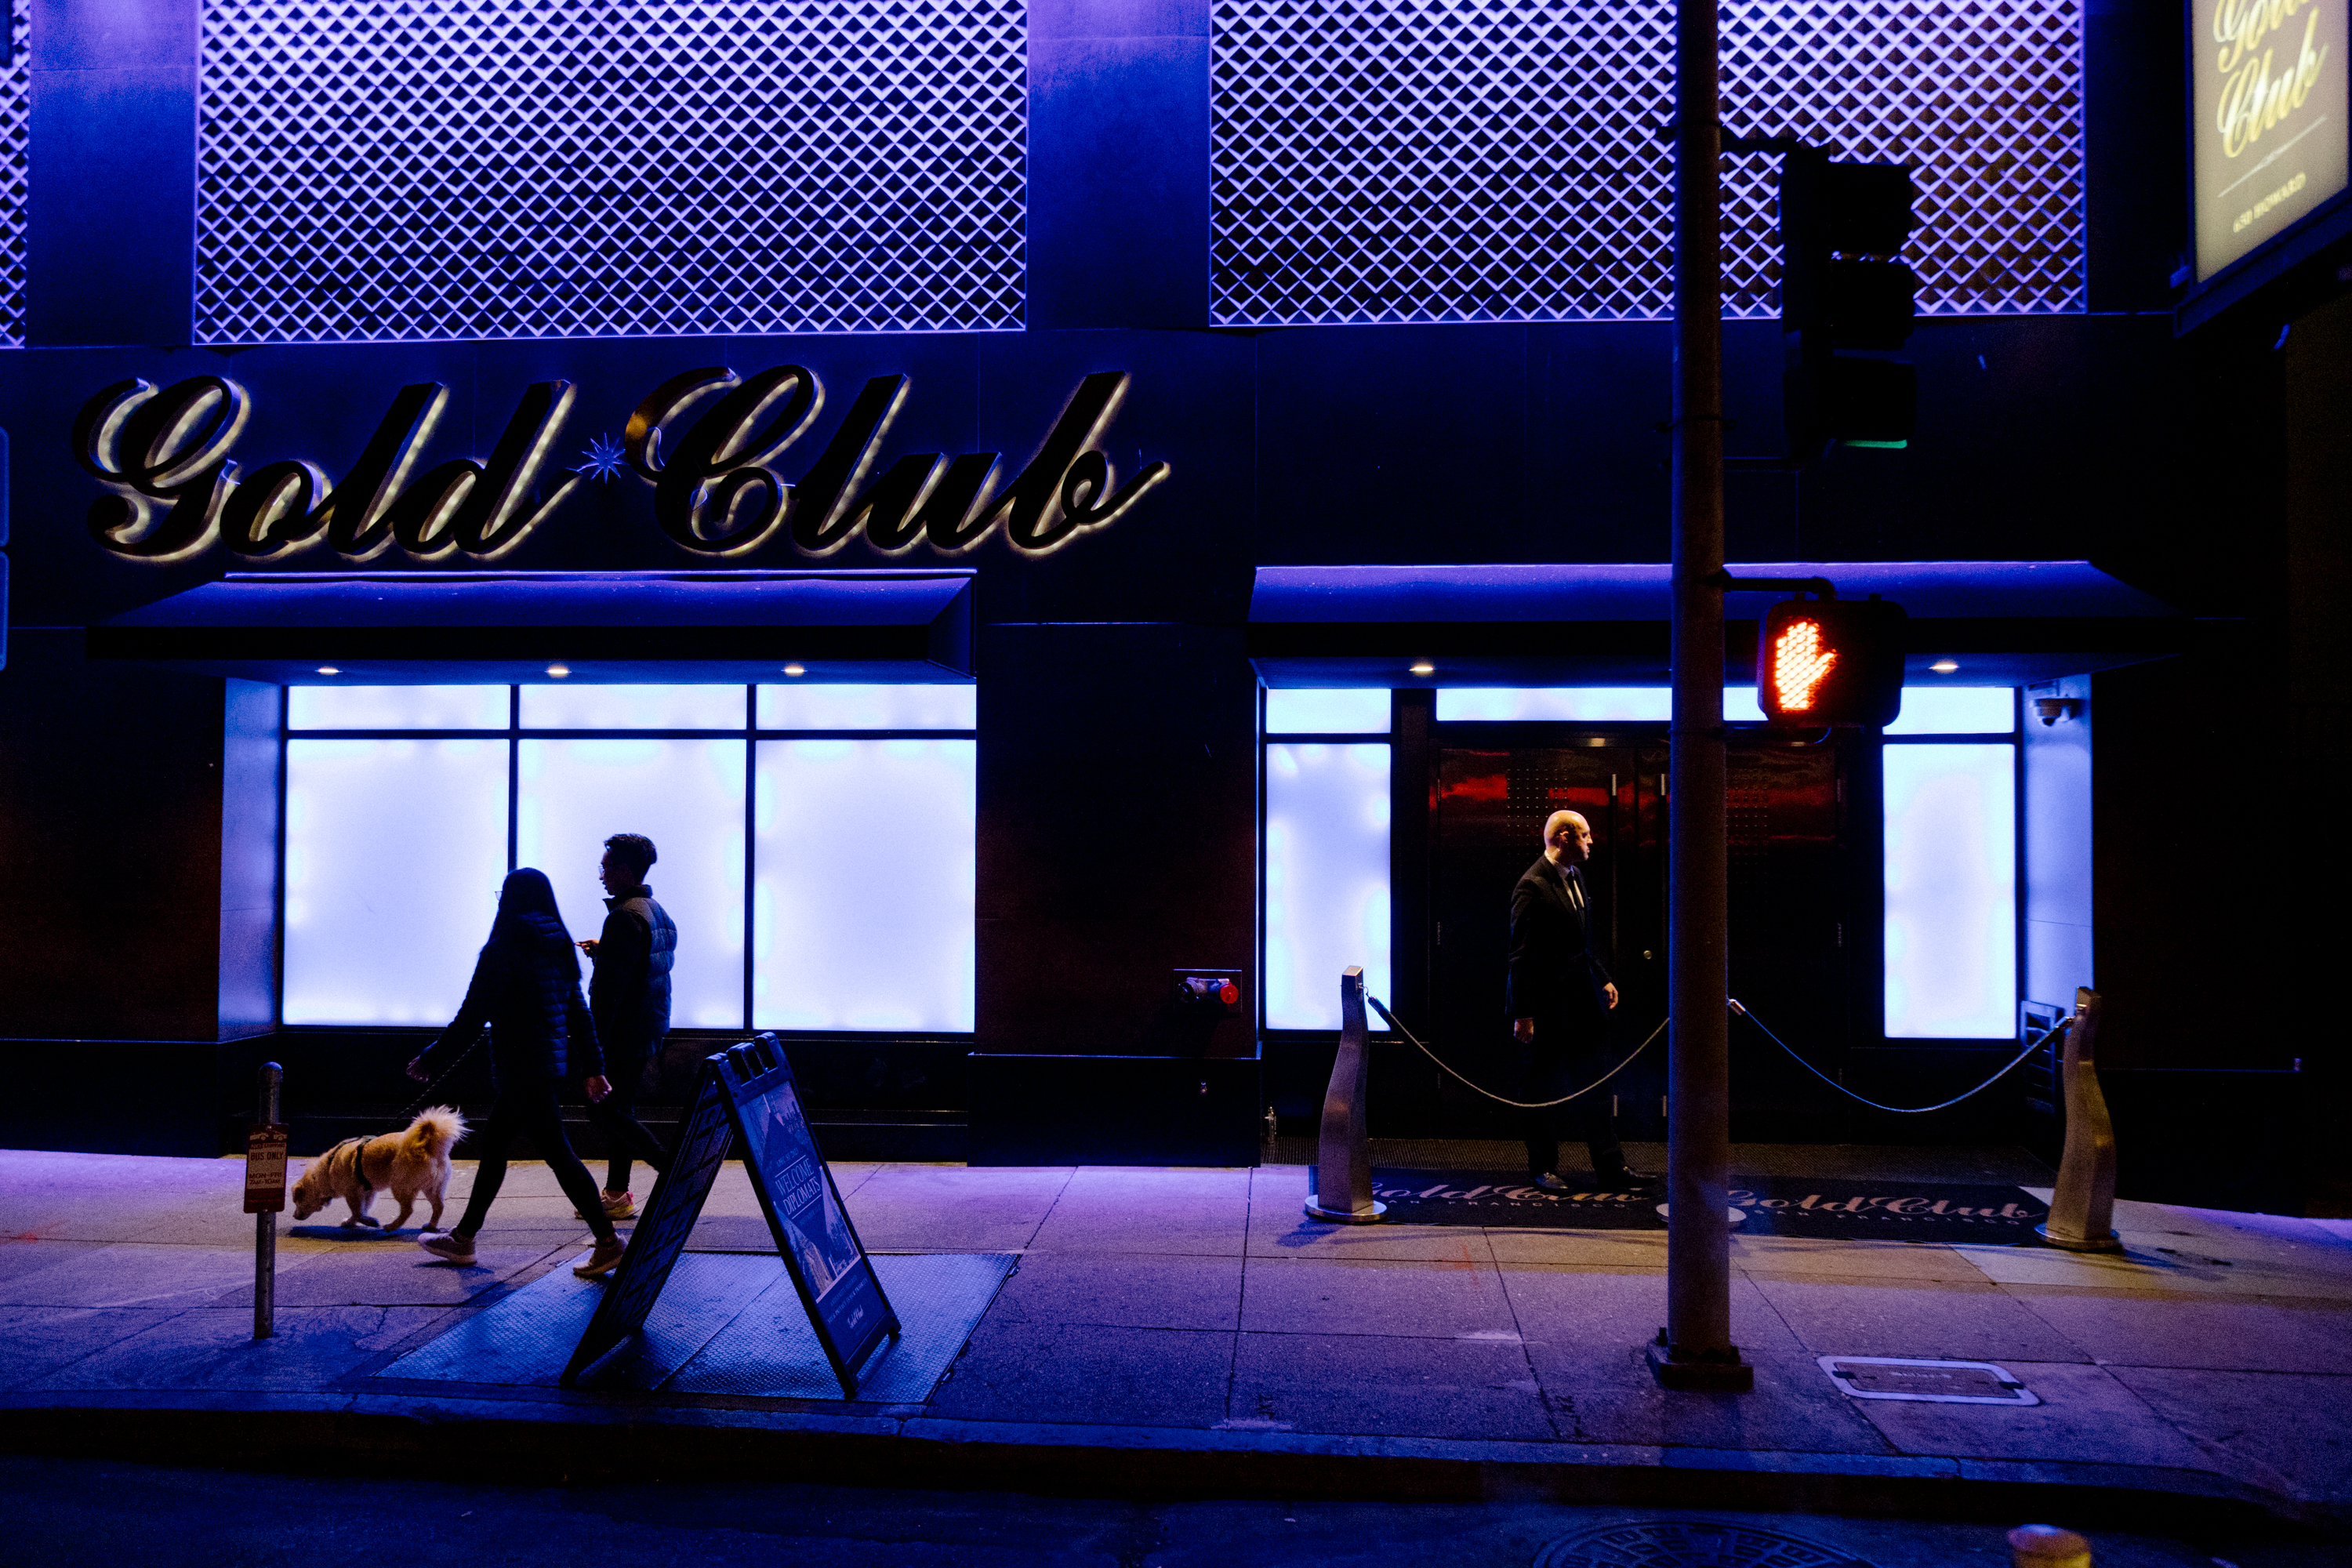 An exterior of a club with signage that reads Gold Club.